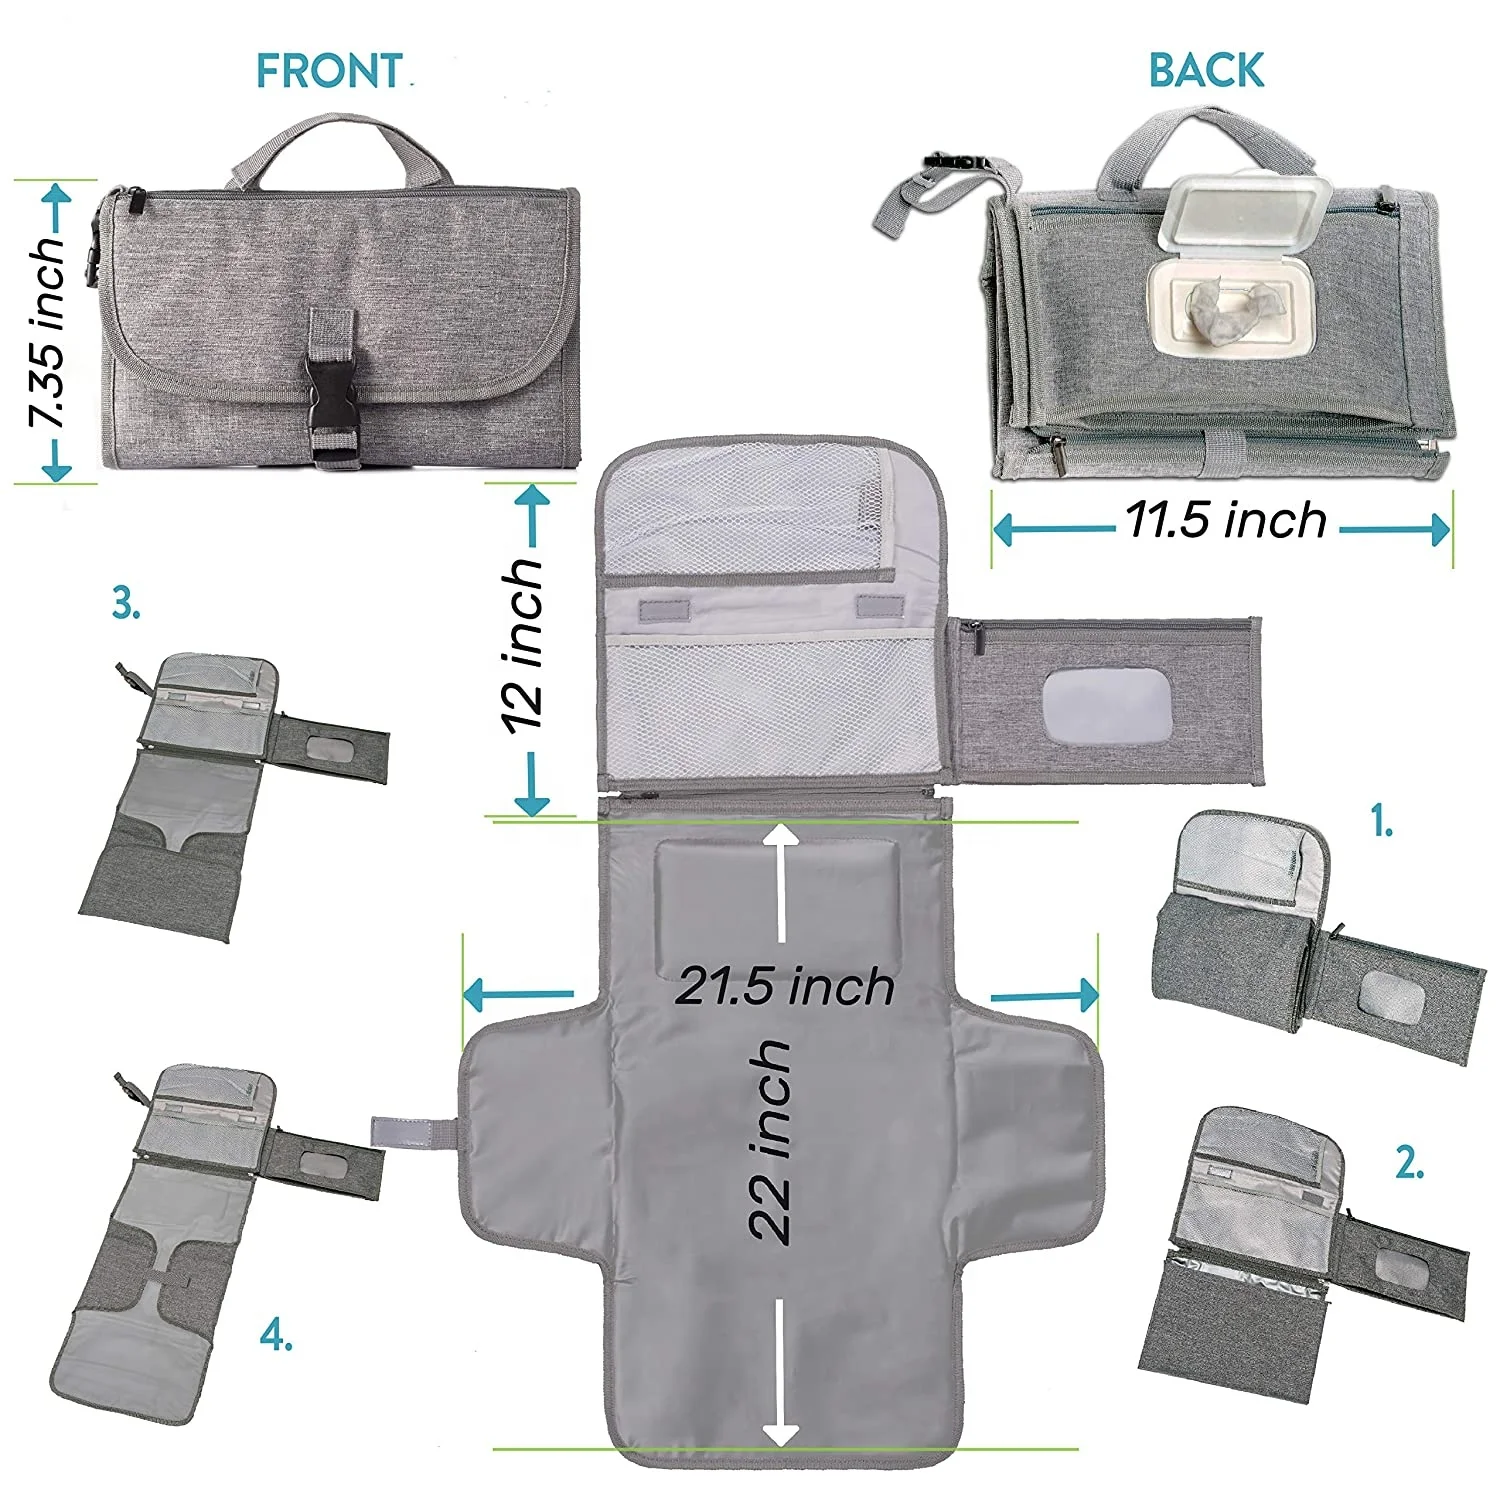 

Portable Diaper Baby Changing Pad with Smart Wipes Pocket for Newborn boy & Girl, Black/grey/customized color